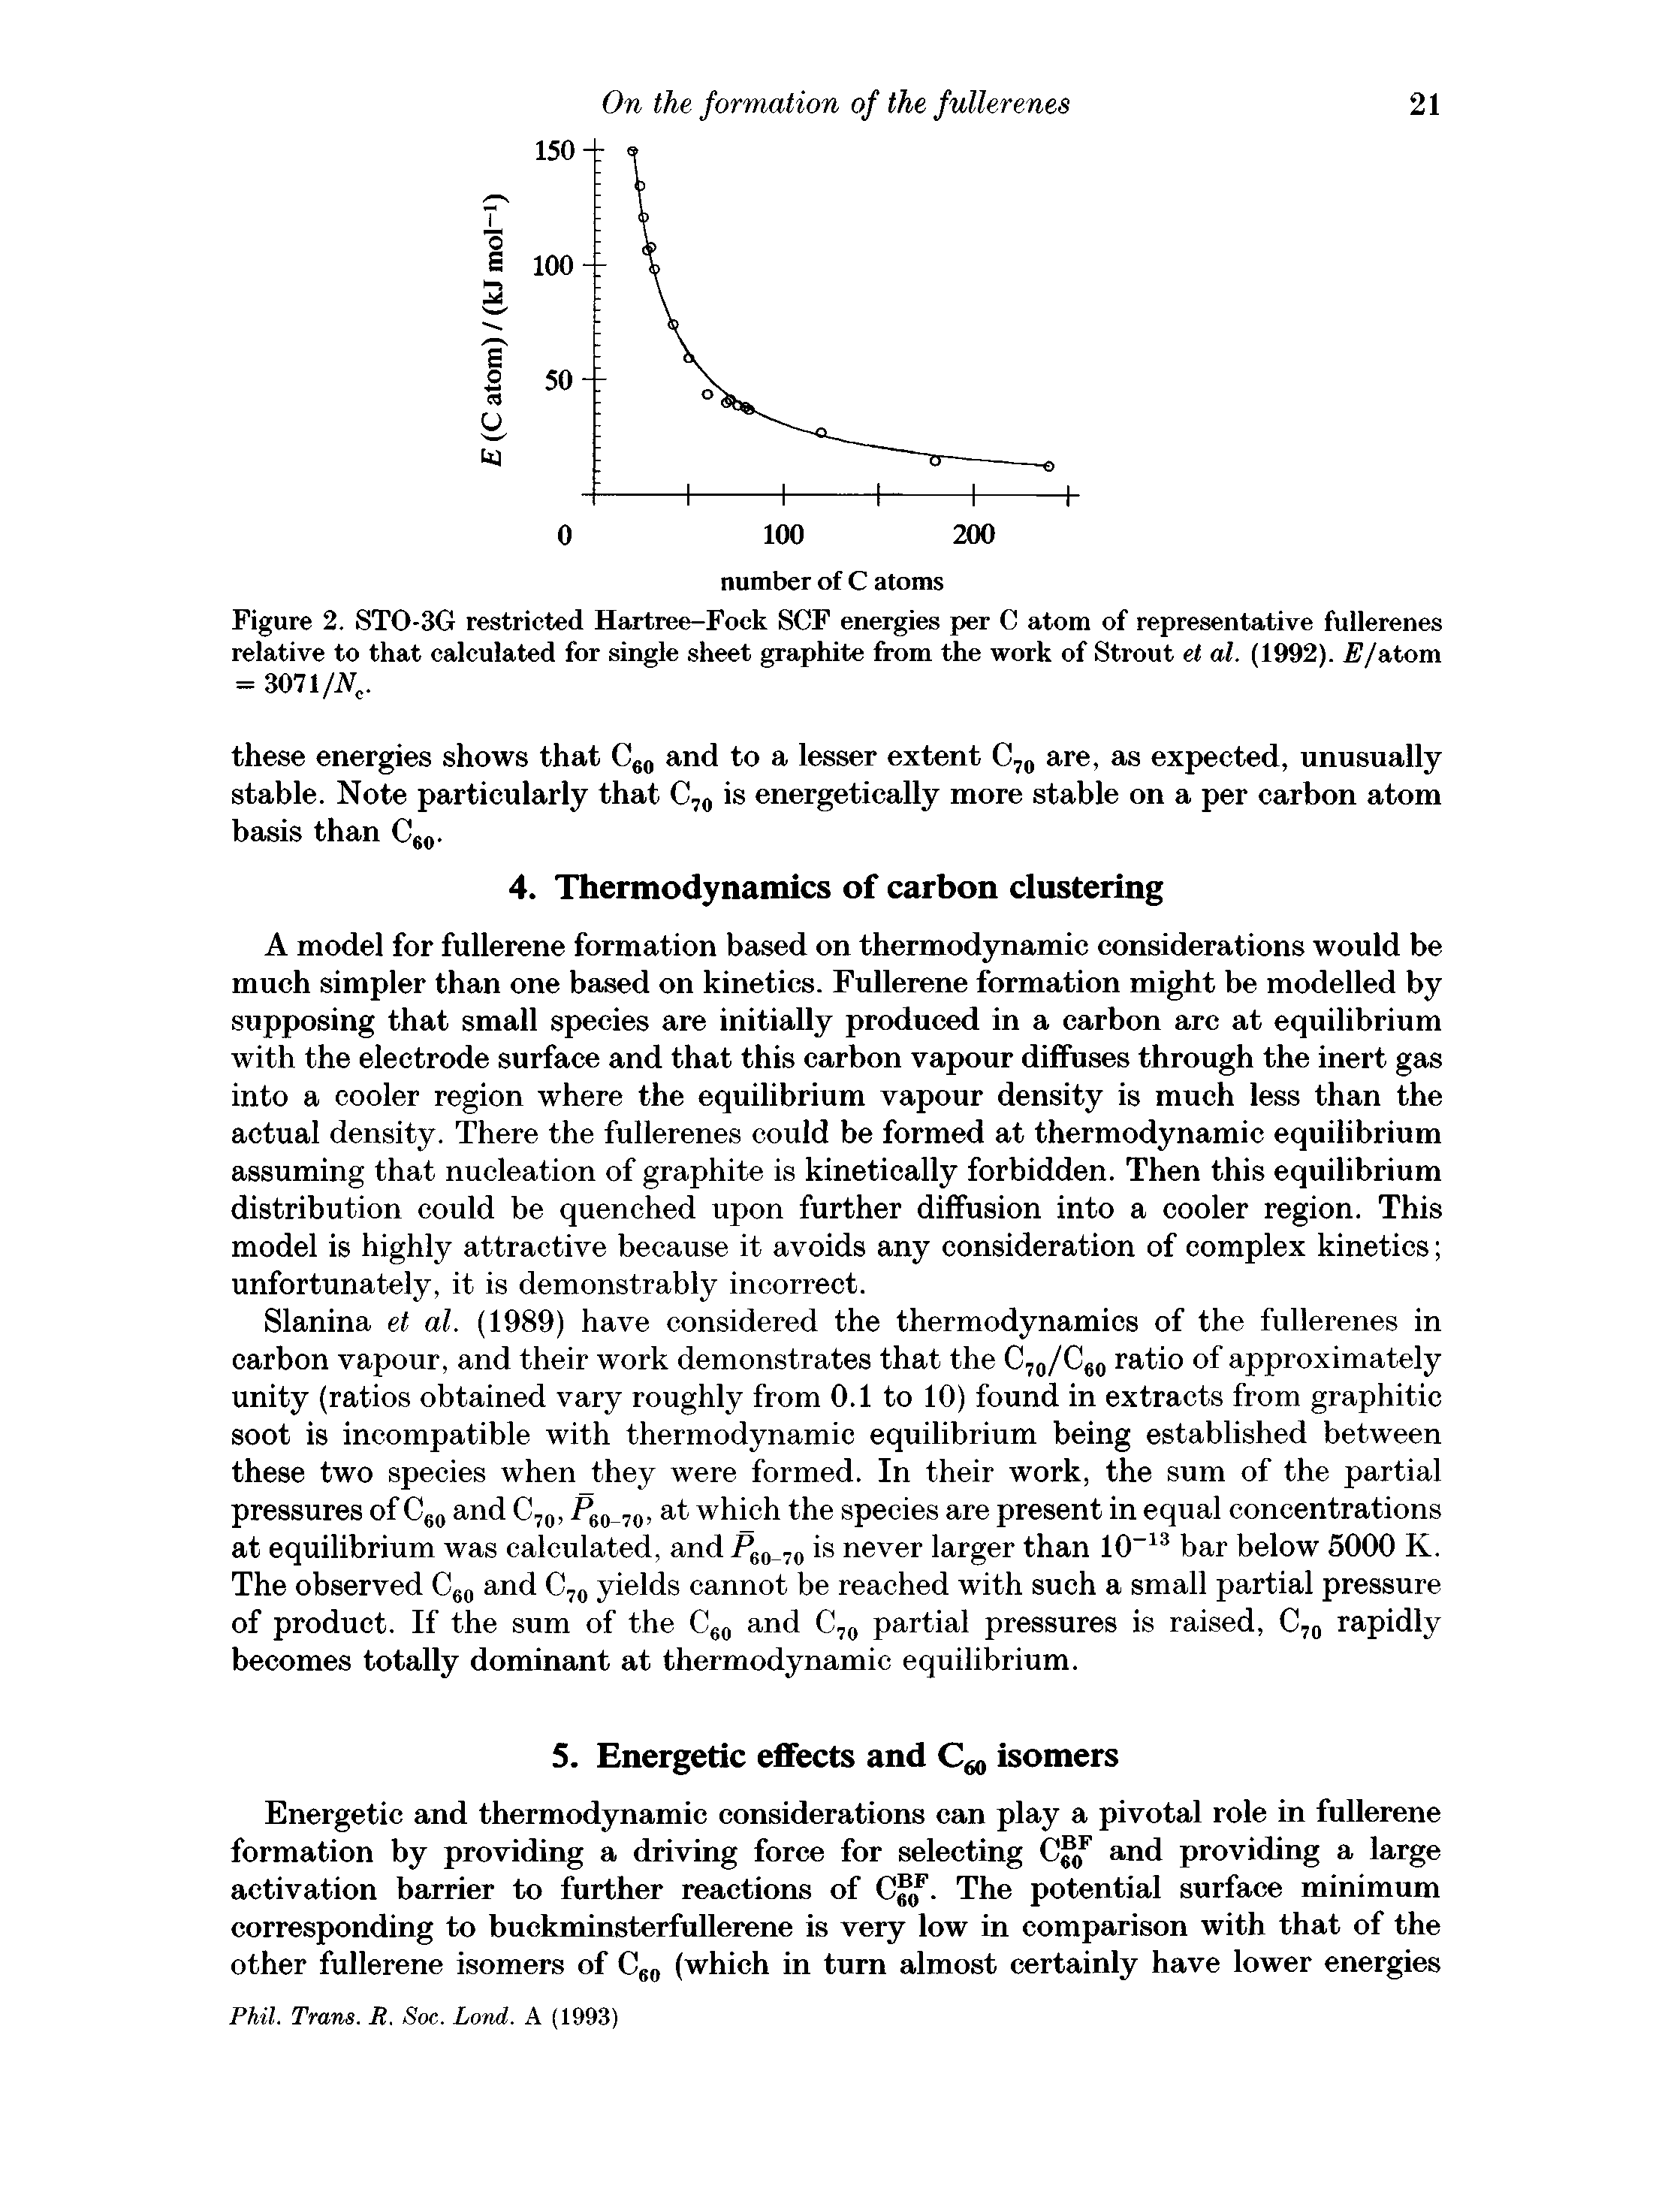 Figure 2. ST0-3G restricted Hartree-Fock SCF energies per C atom of representative fullerenes relative to that calculated for single sheet graphite from the work of Strout el at. (1992). F/atom = 3071/JVC.